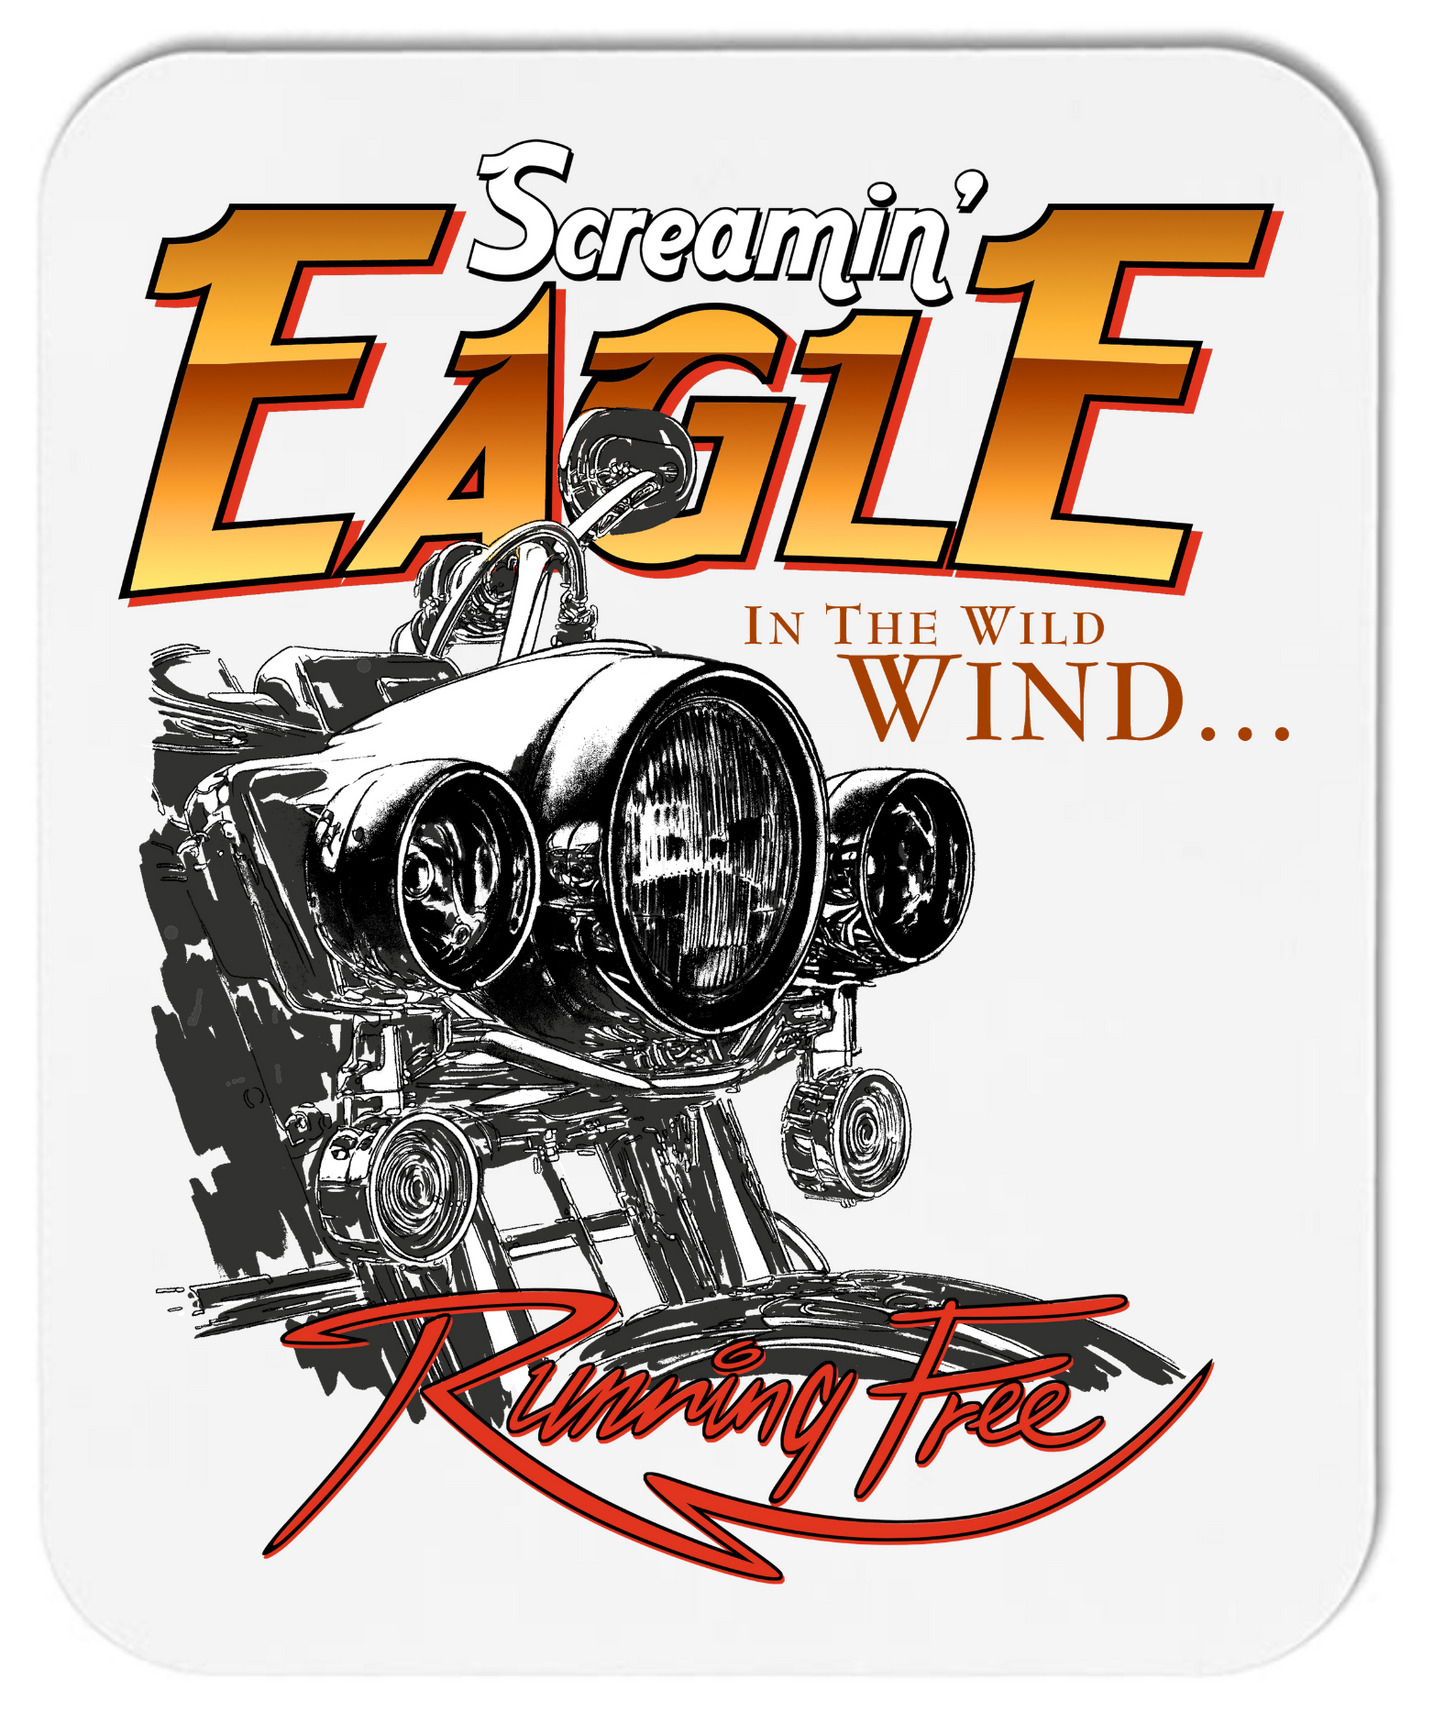 Screamin' Eagle Motorcycle - Mouse Pad - Mister Snarky's